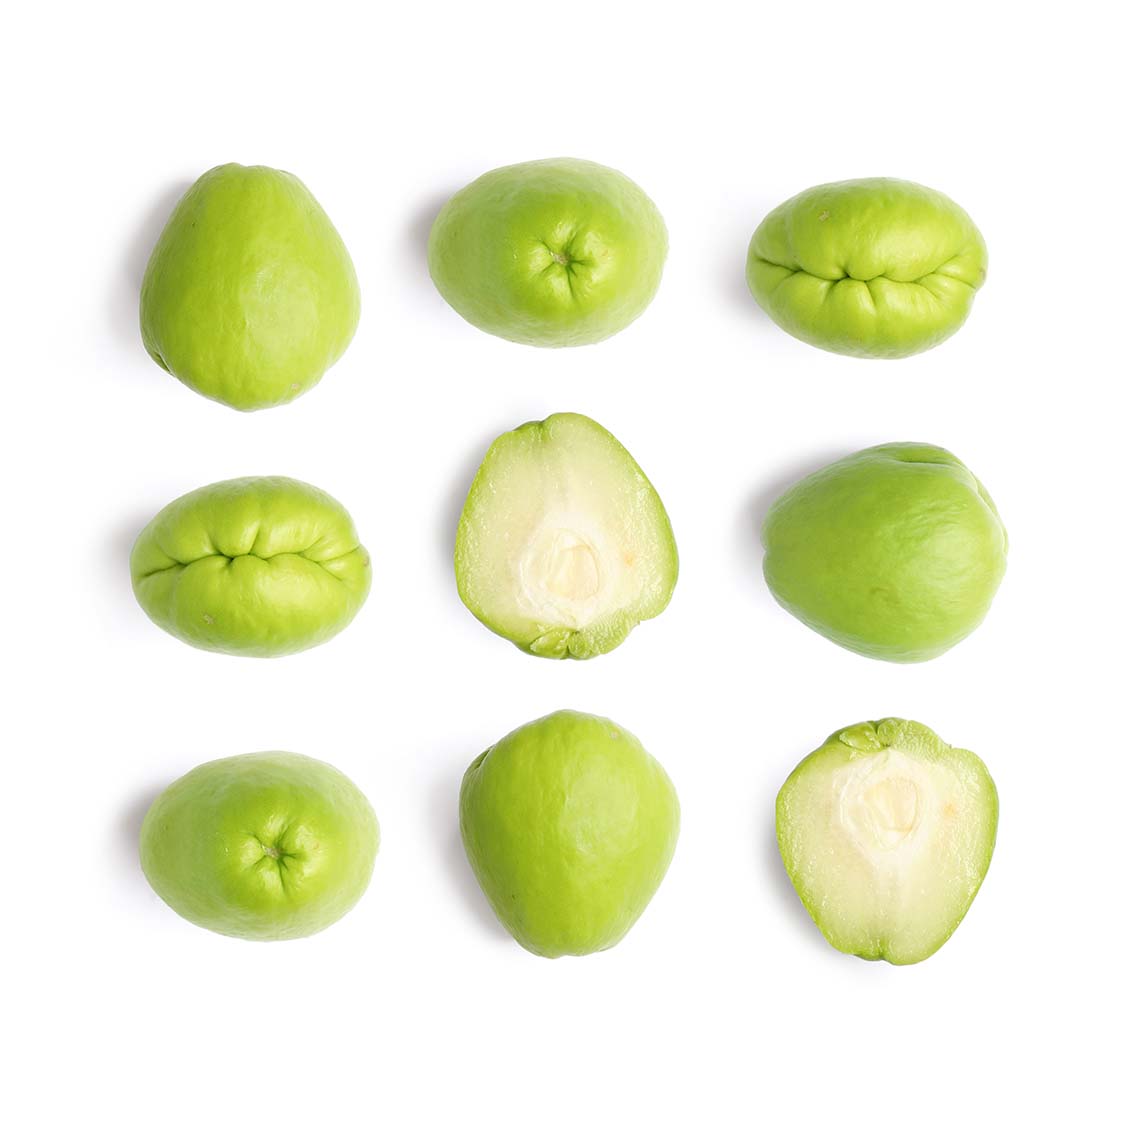 Chayote - Chow Chow | Exotic Fruits - Rare & Tropical Exotic Fruit Shop UK